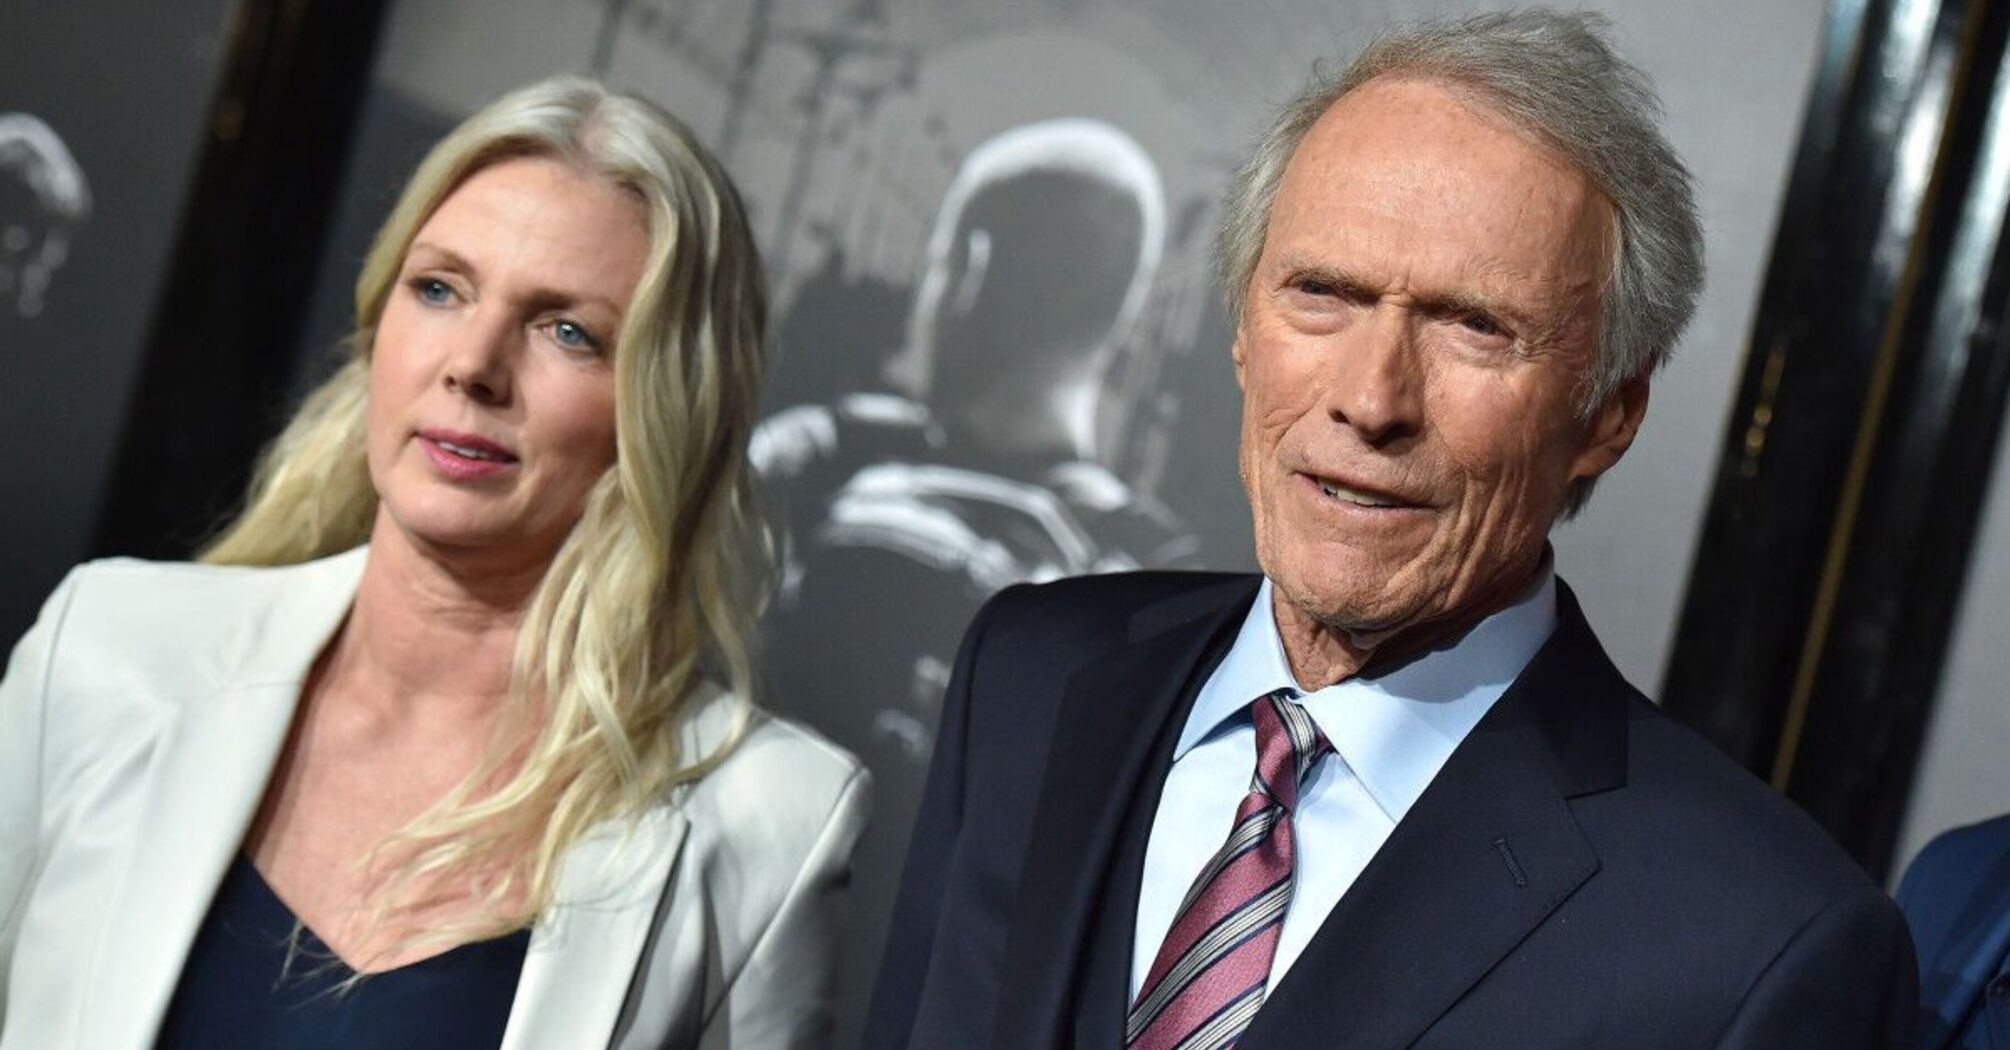 Clint Eastwood’s Partner Christina Sandera's Cause of Death Announced